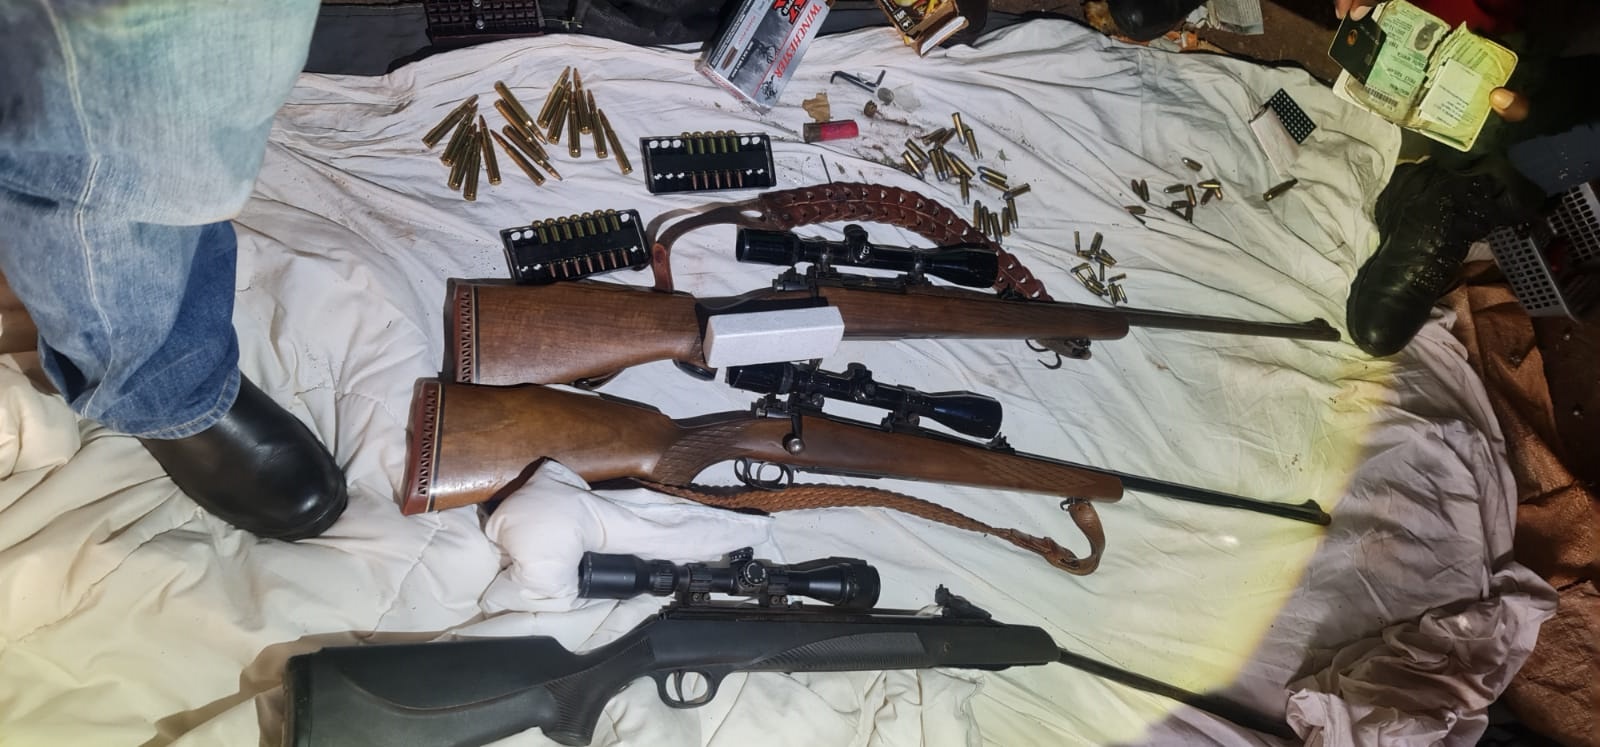 Additional two suspects arrested and three rifles recovered linked to Hoedspruit business burglary